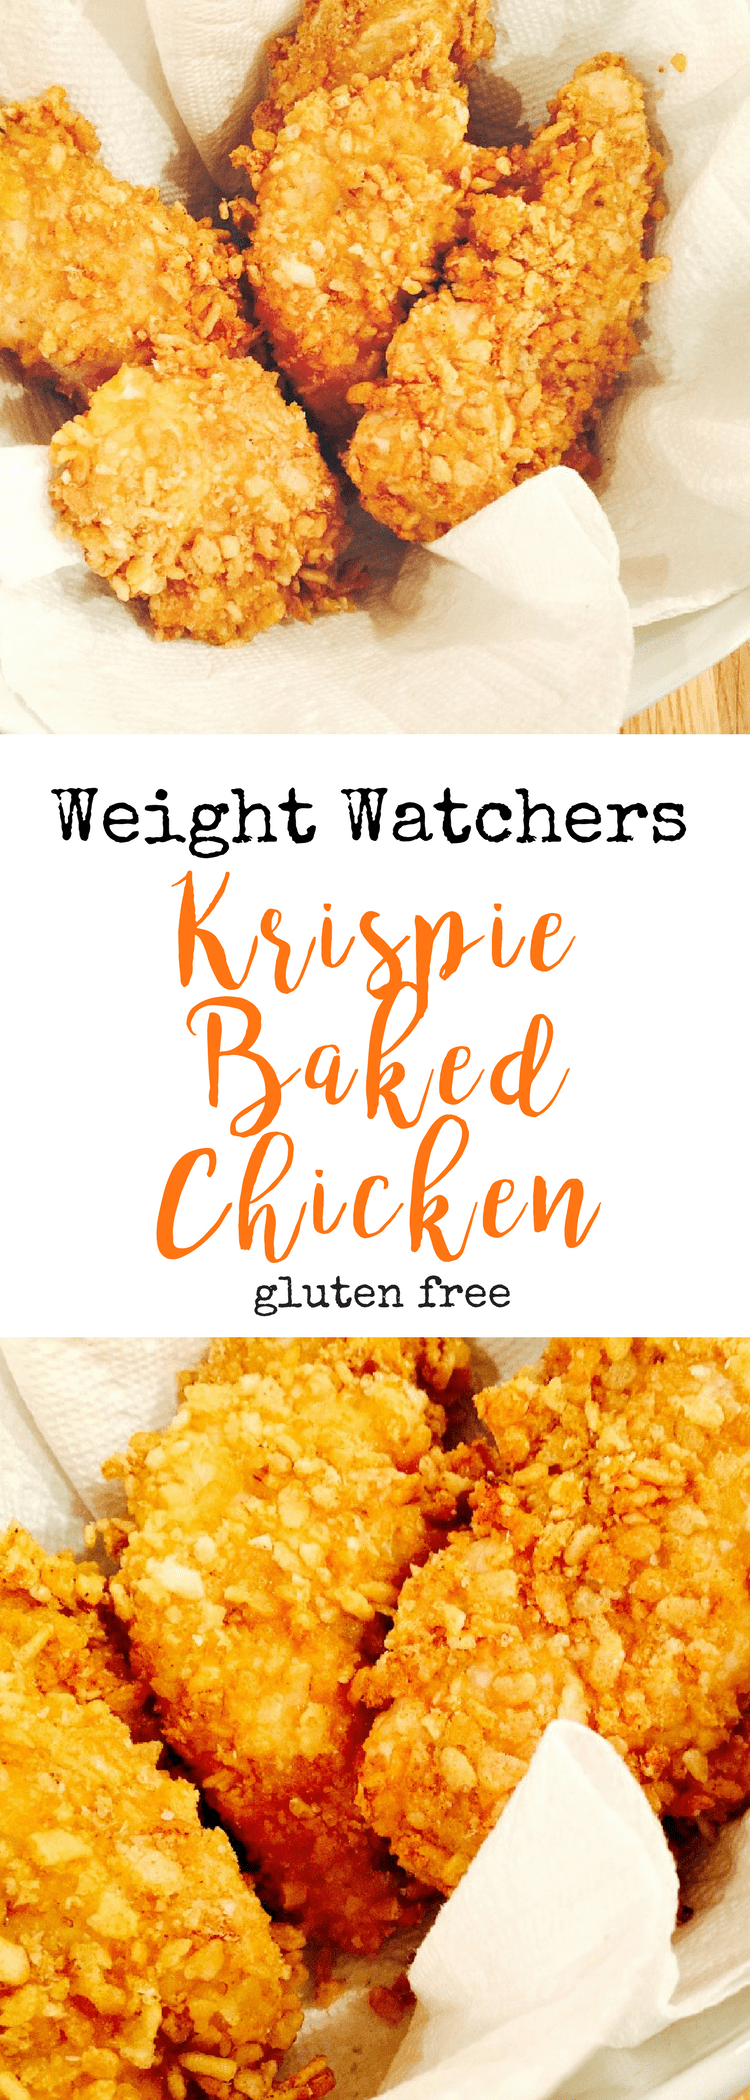 Weight Watchers Krispie Baked Chicken | Confessions of a Fit Foodie